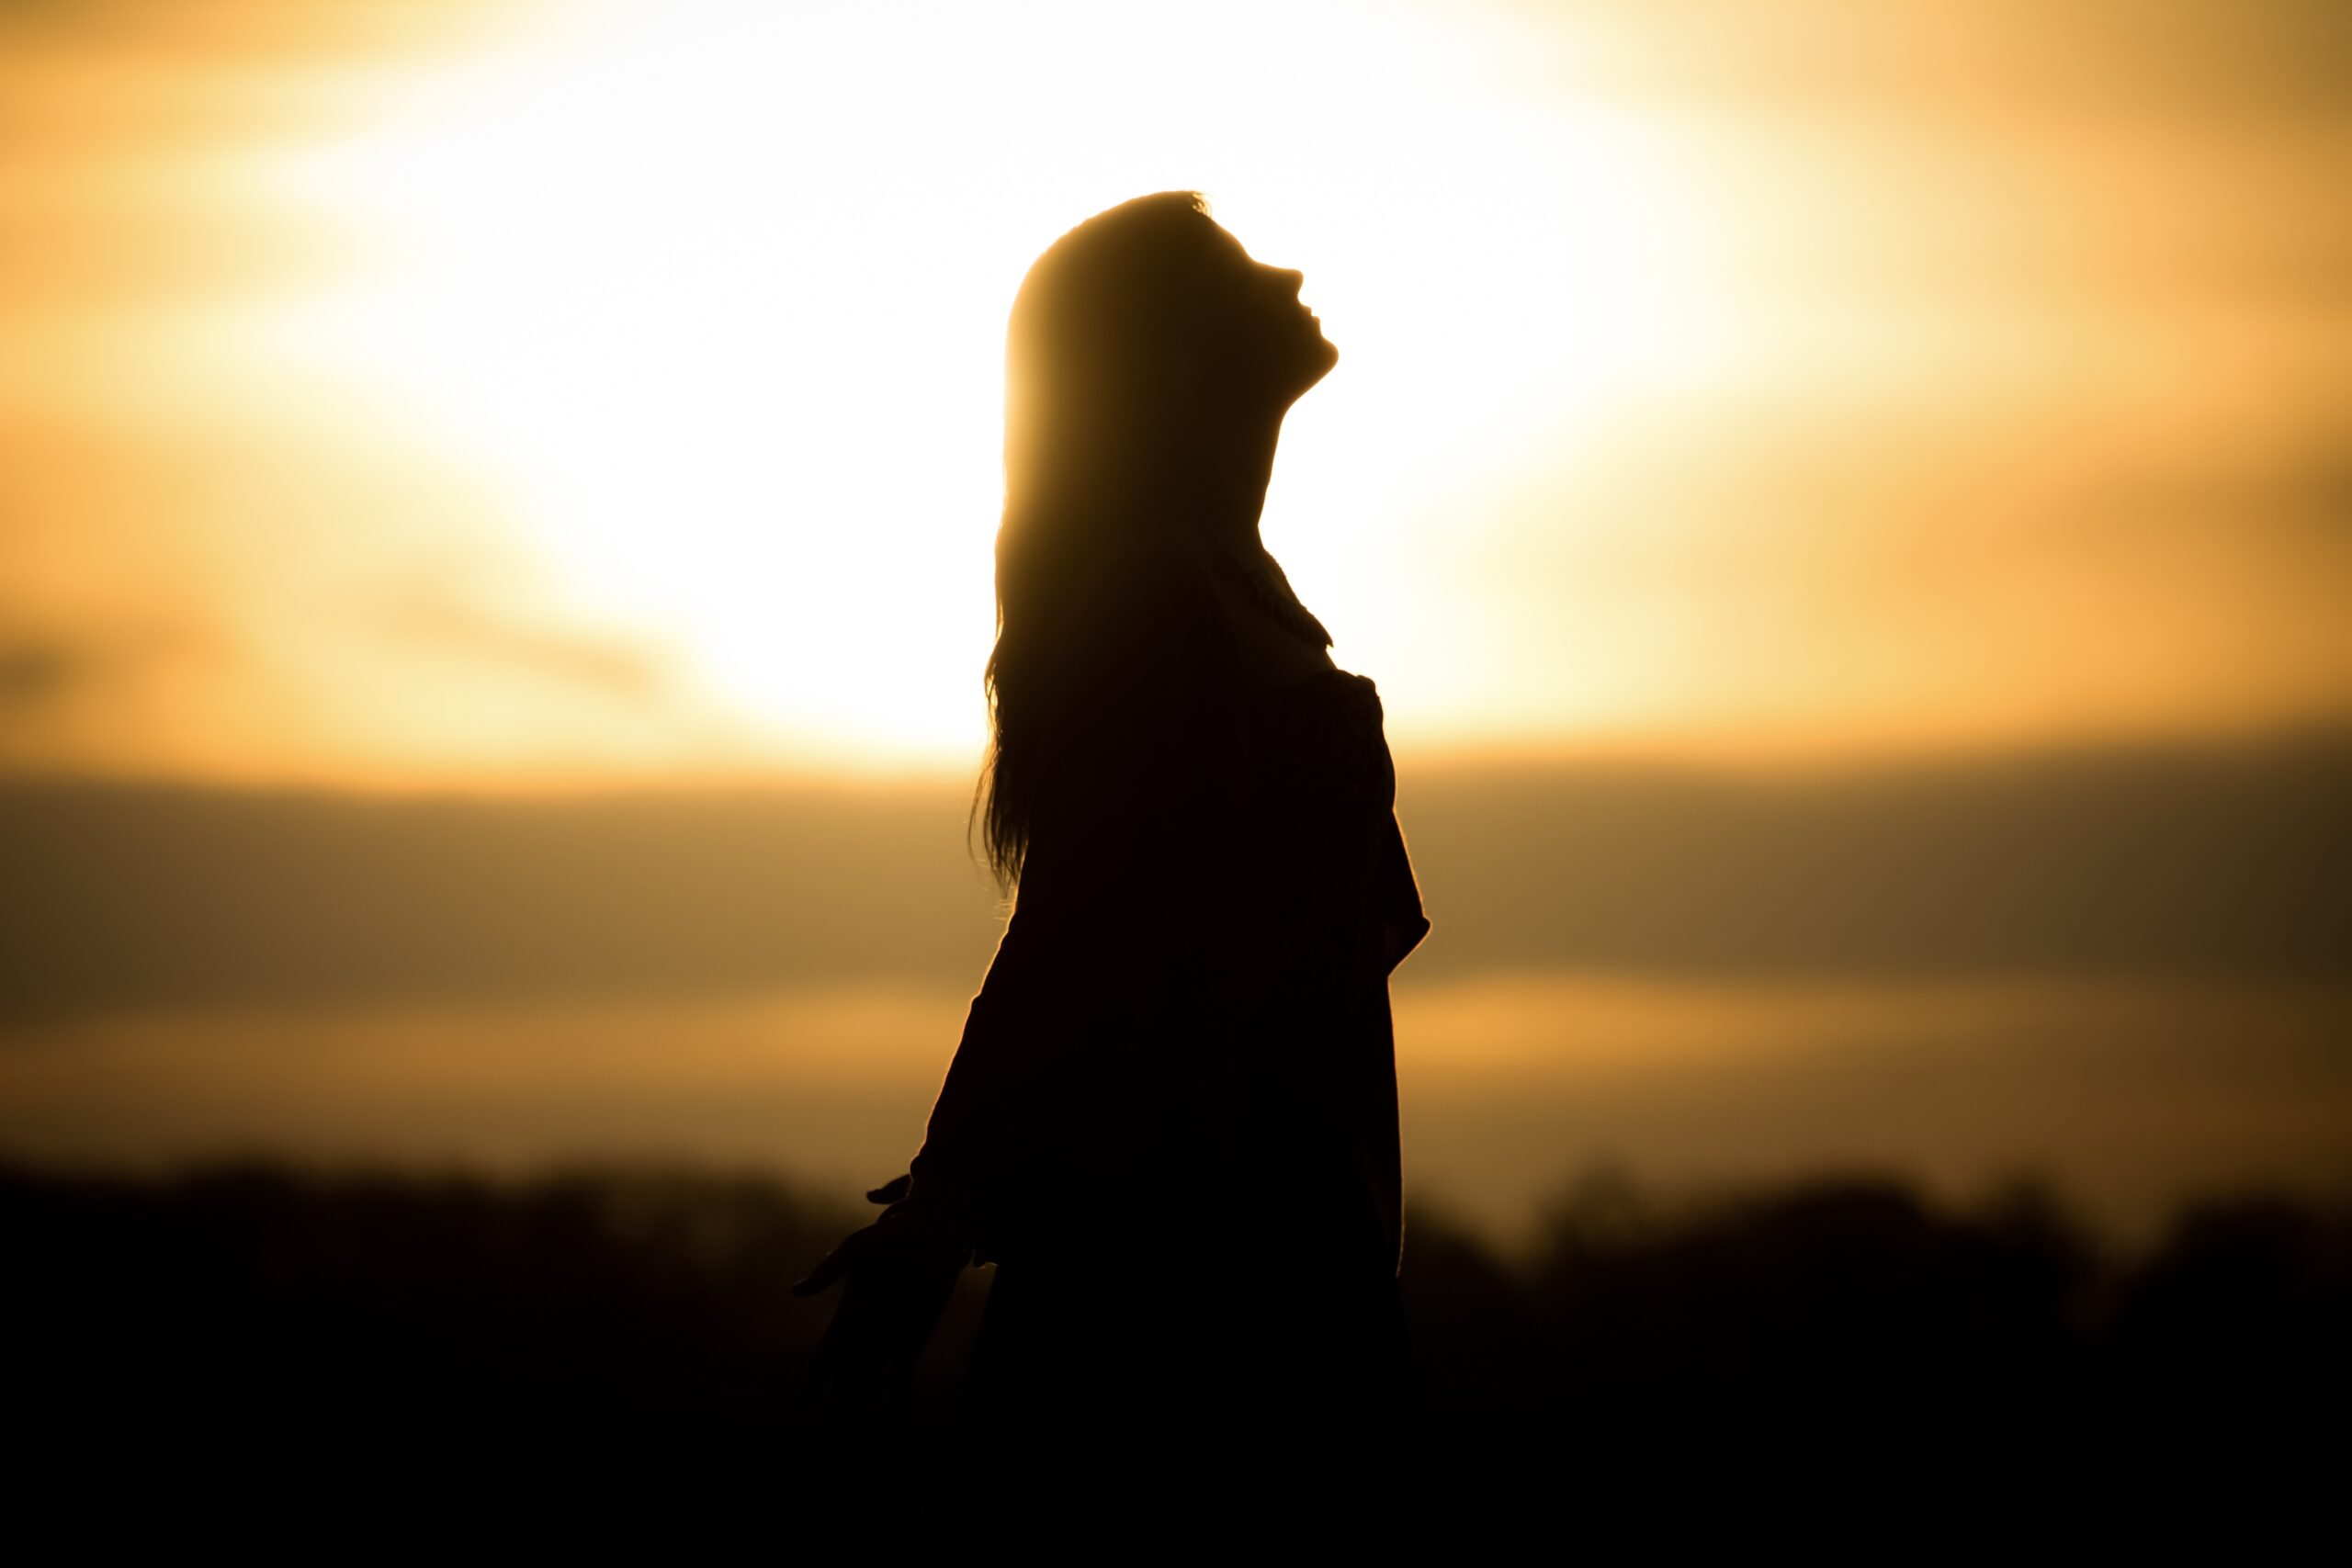 silhouette of woman meditating in foreground, sunrise or sunset in background